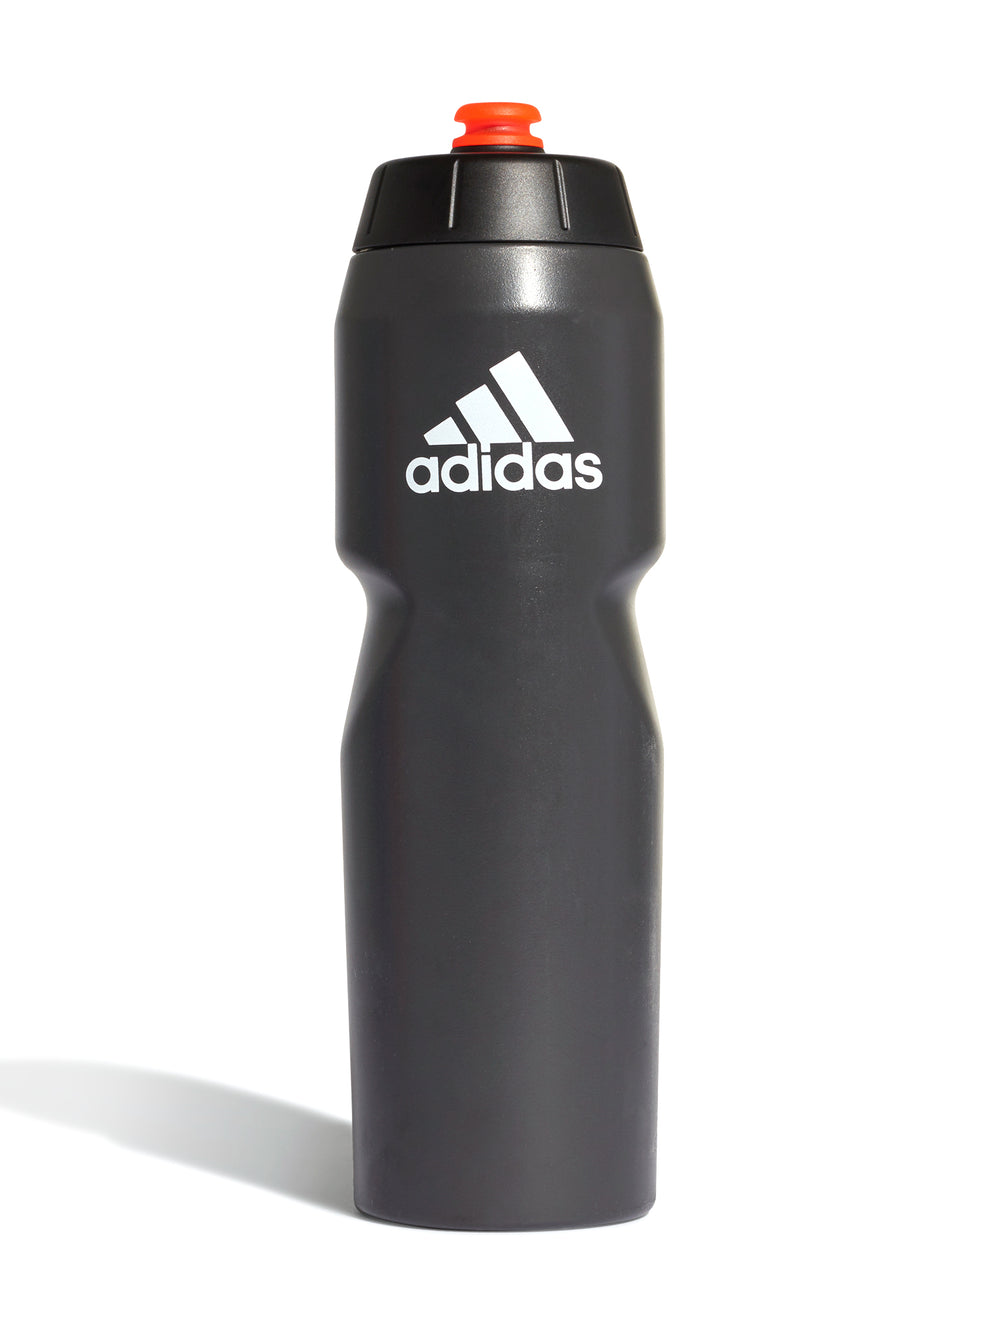 ADIDAS PERFORMANCE BOTTLE 0.75 - CLEARANCE